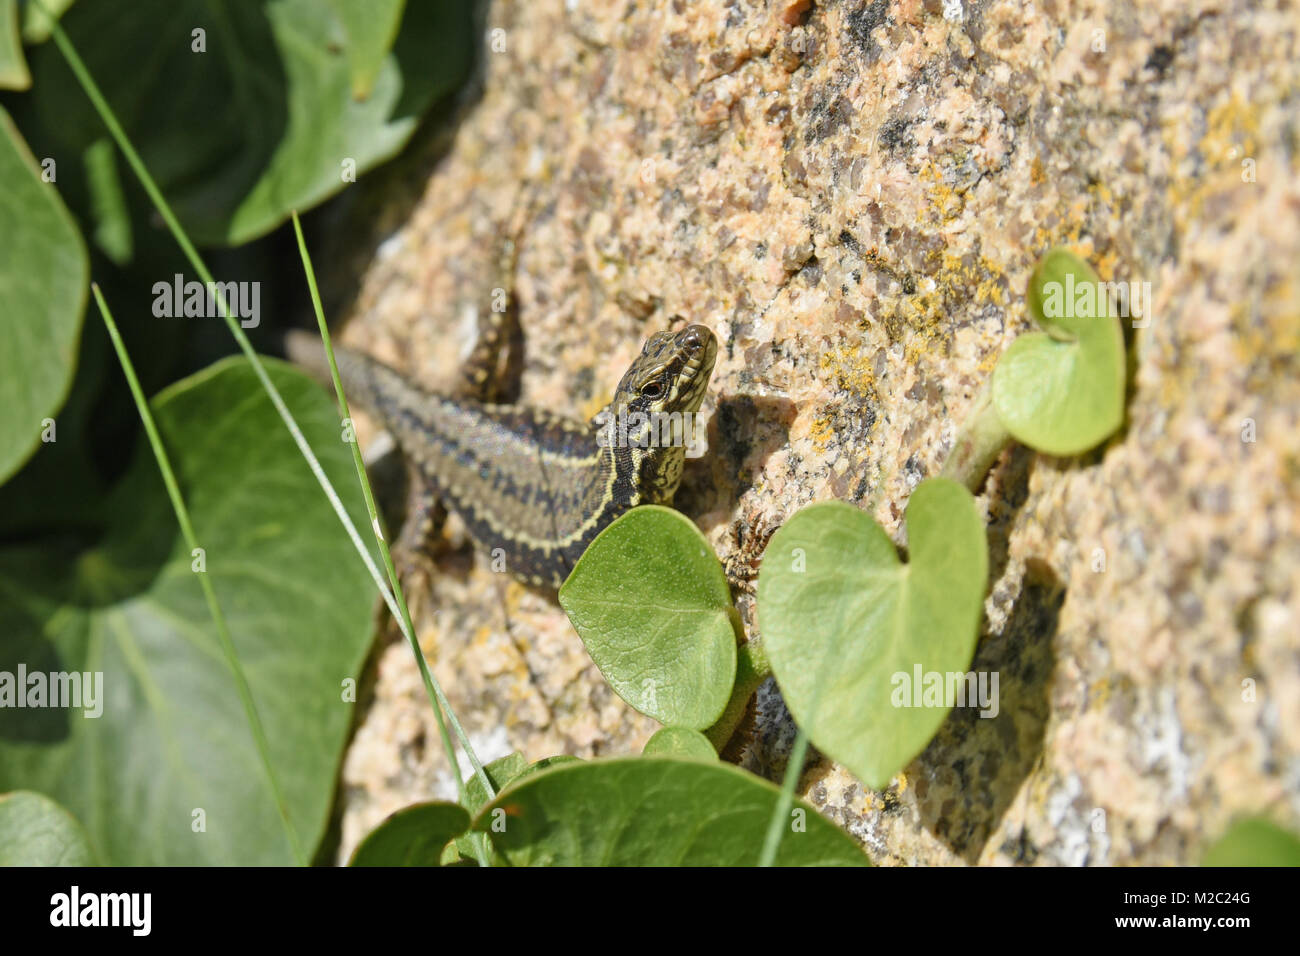 Female Common Wall Lizard Podarcis muralis on a rock face on Gorey Castle on the Island of Jersey UK with ivy growing up the wall. Stock Photo